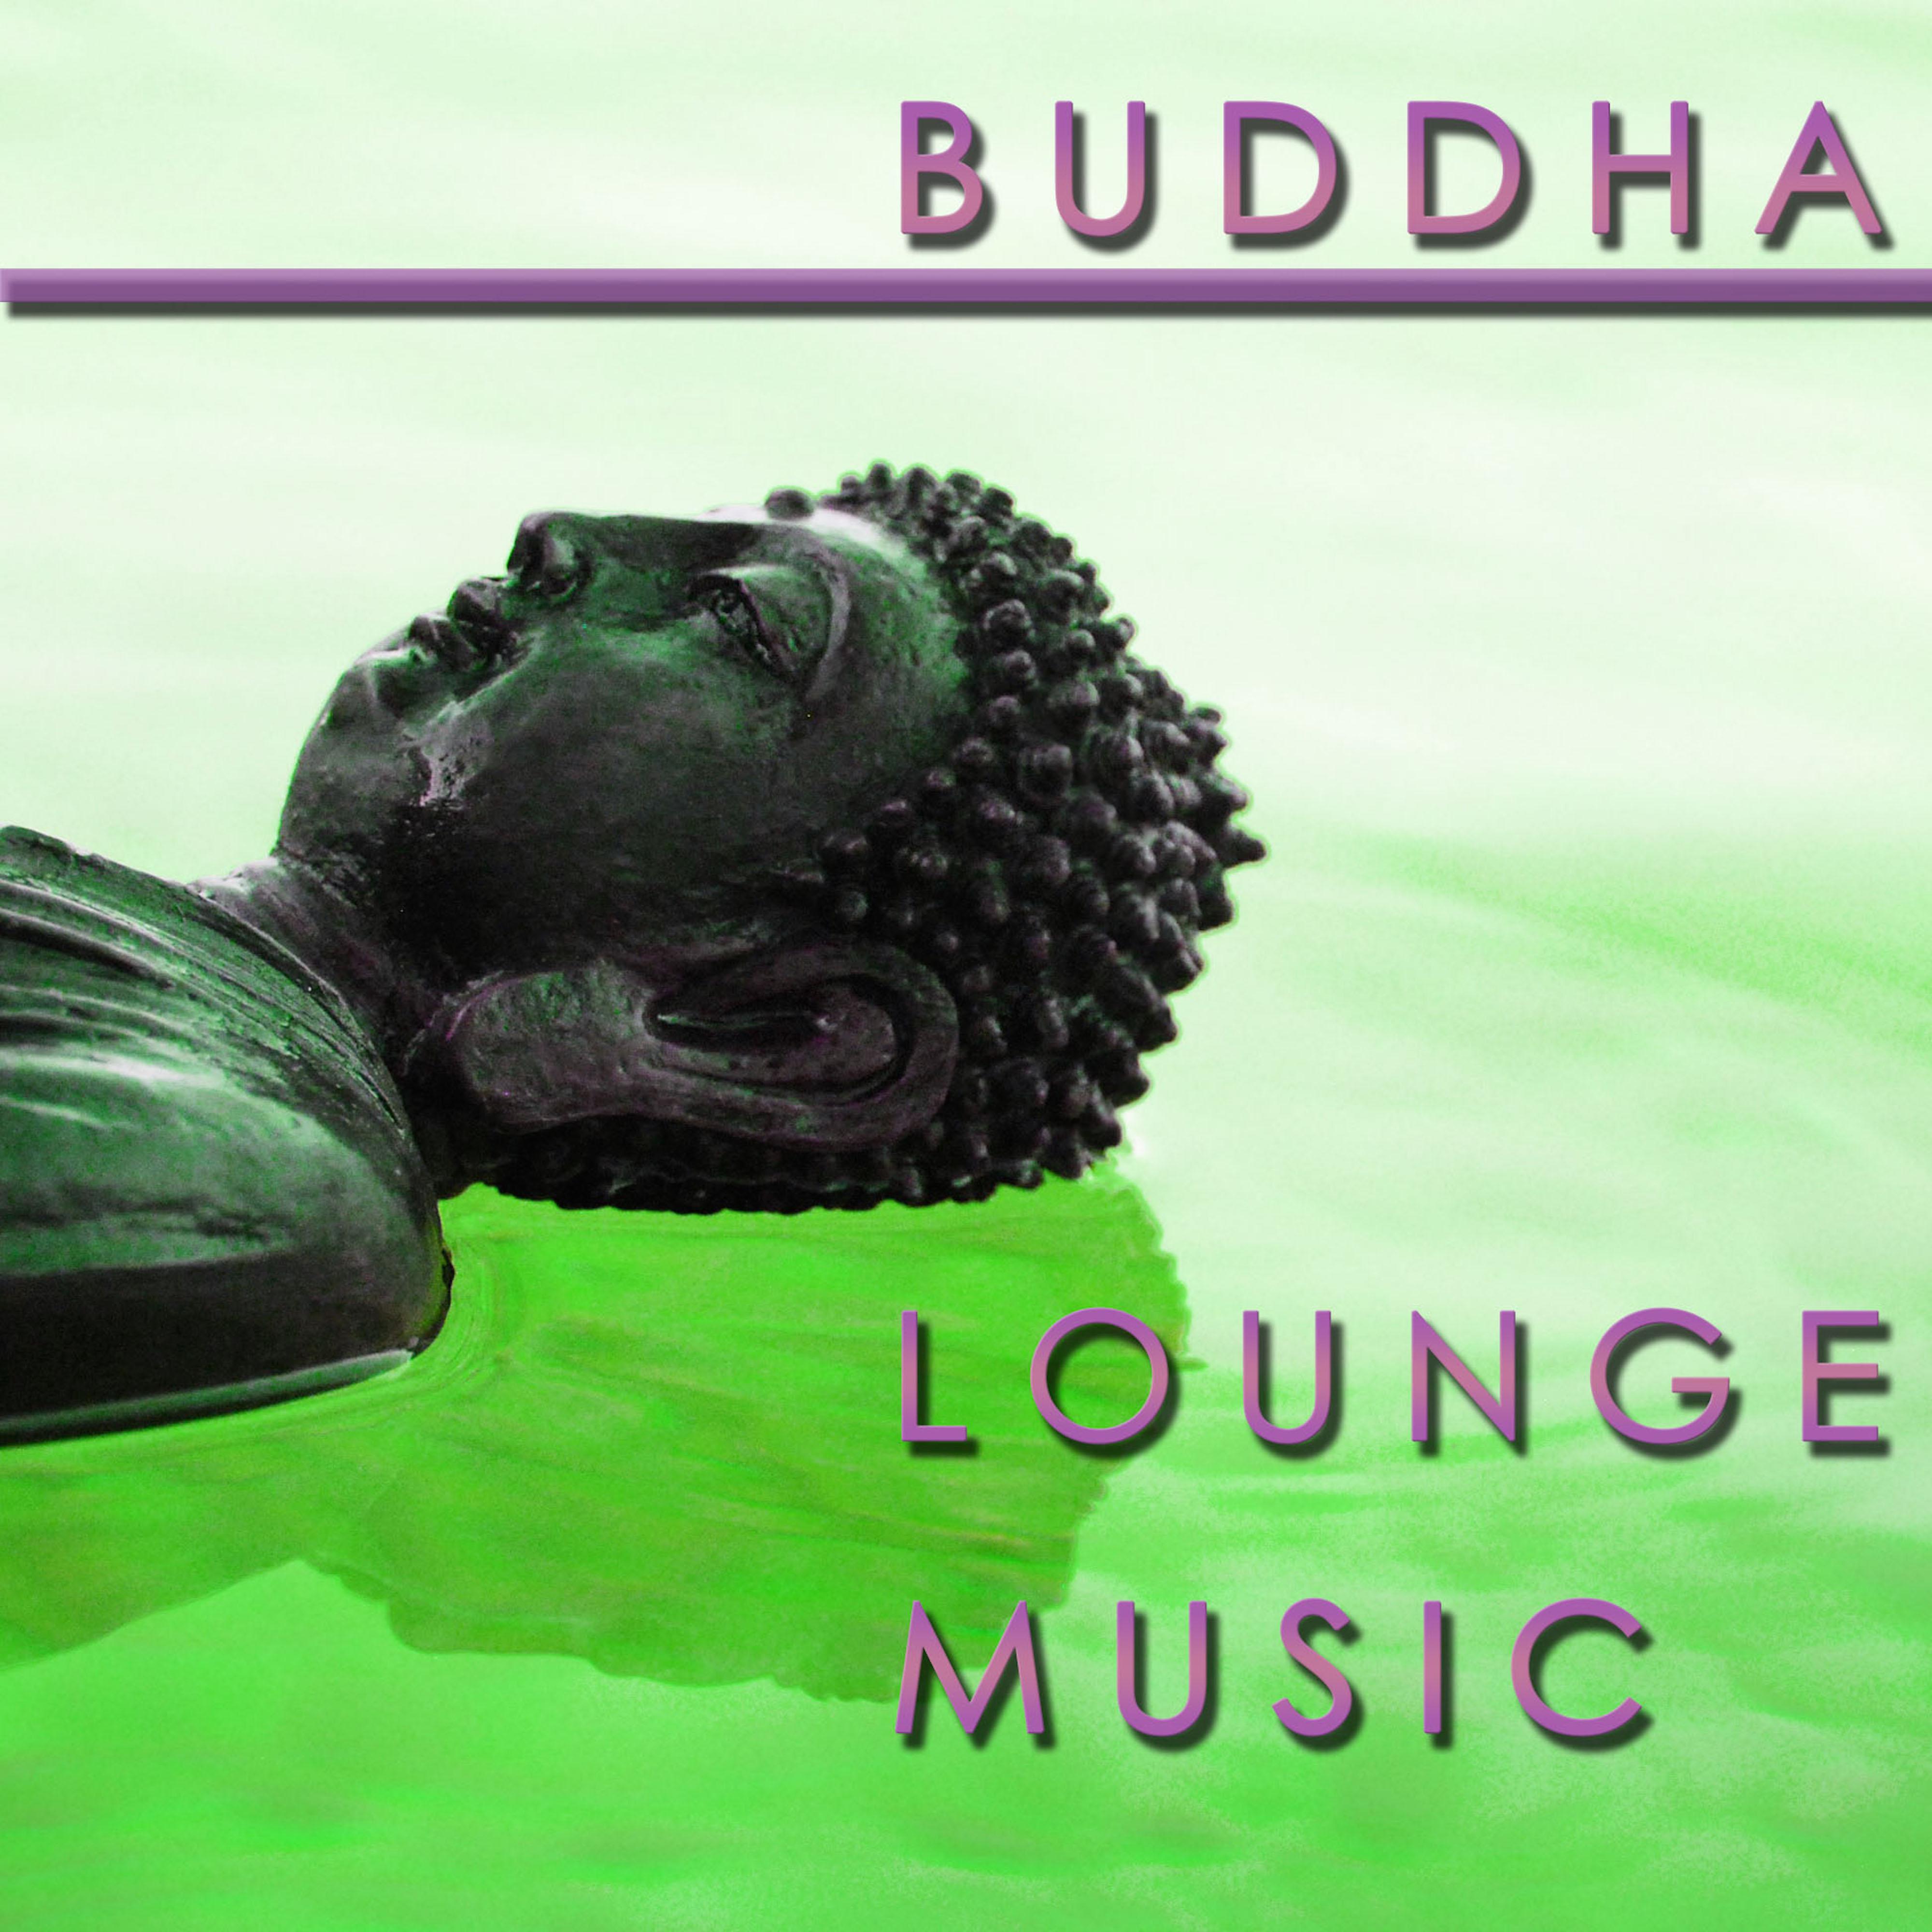 Buddha Lounge Music: Best Sounds to Help You Work